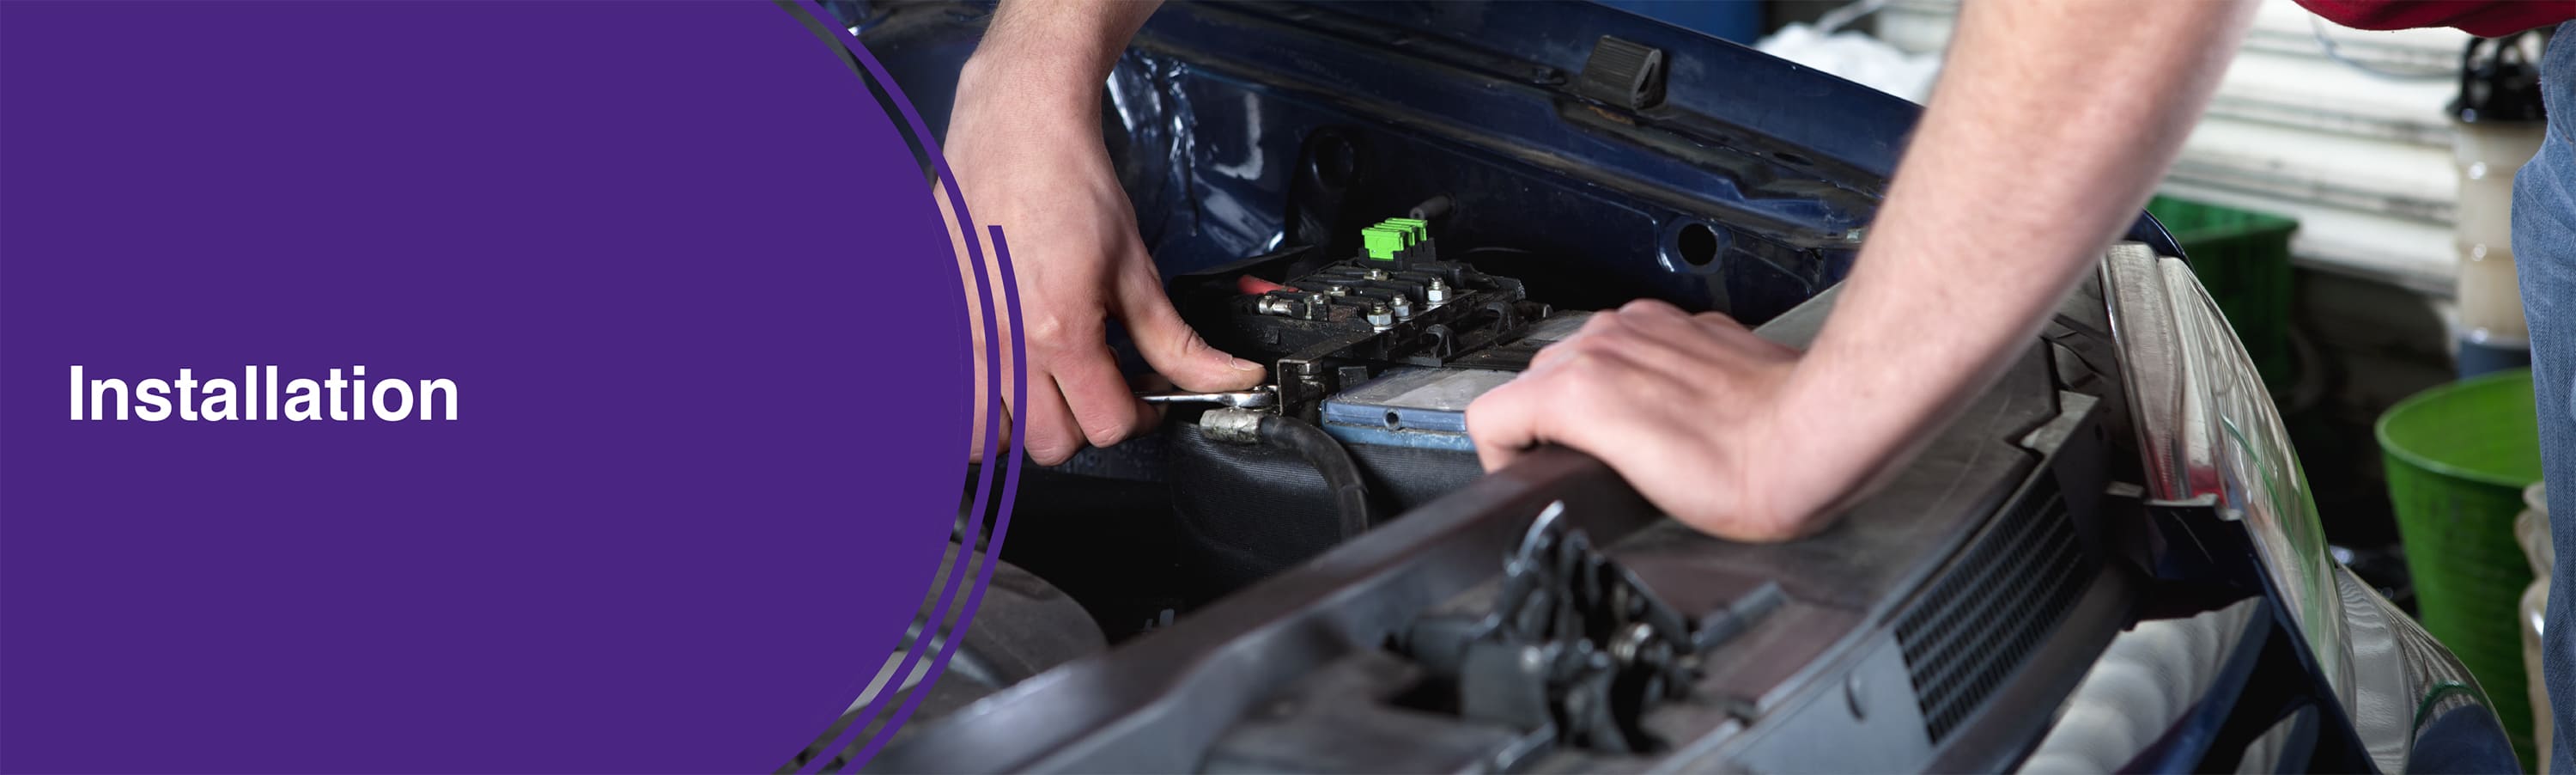 Follow these steps for jump starting a car battery